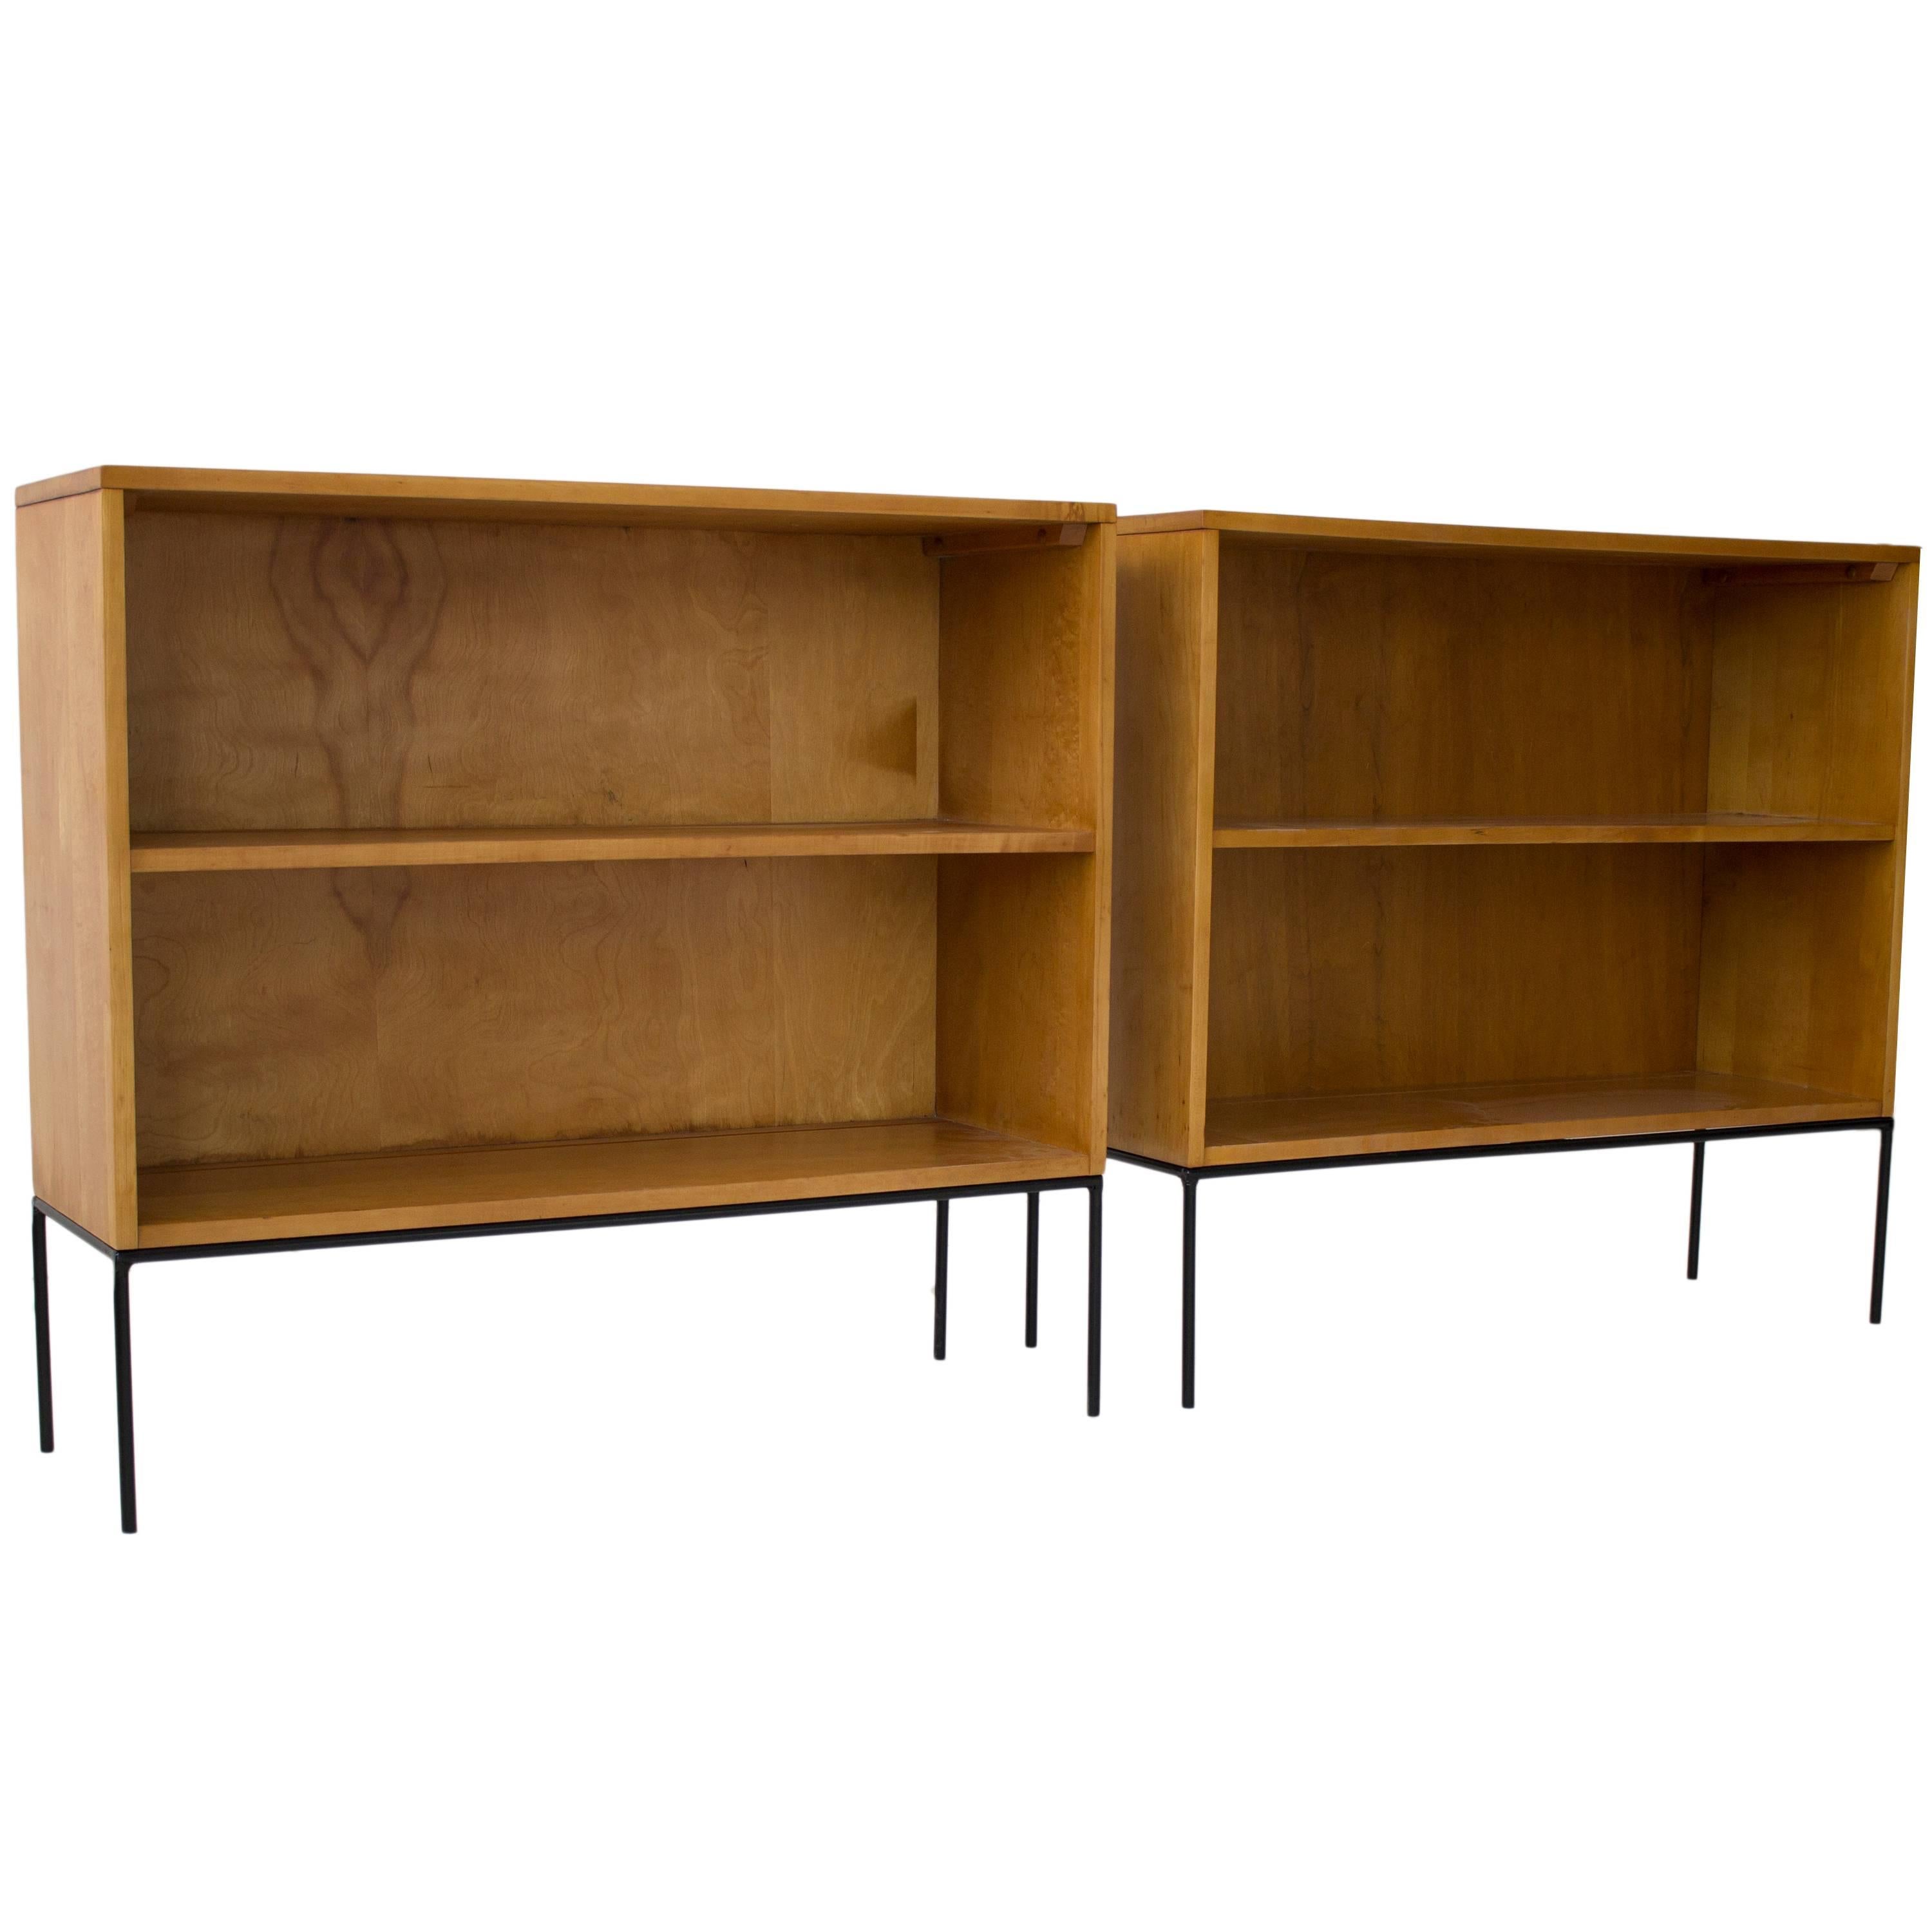 North American Paul McCobb Planner Group Pair of Bookcases